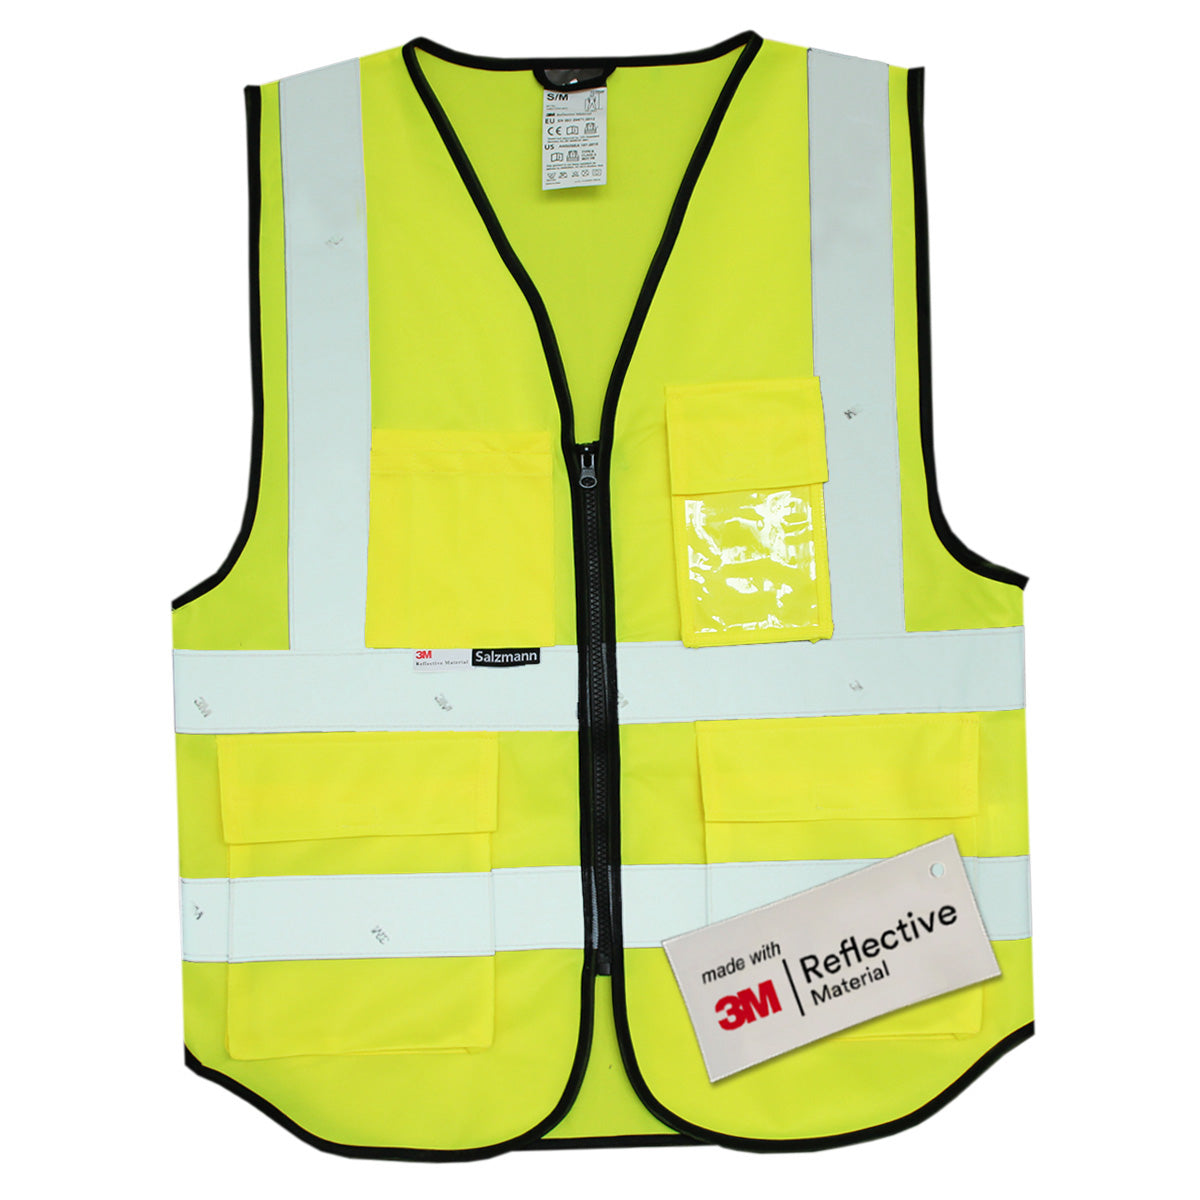 Close up of yellow security vest.  